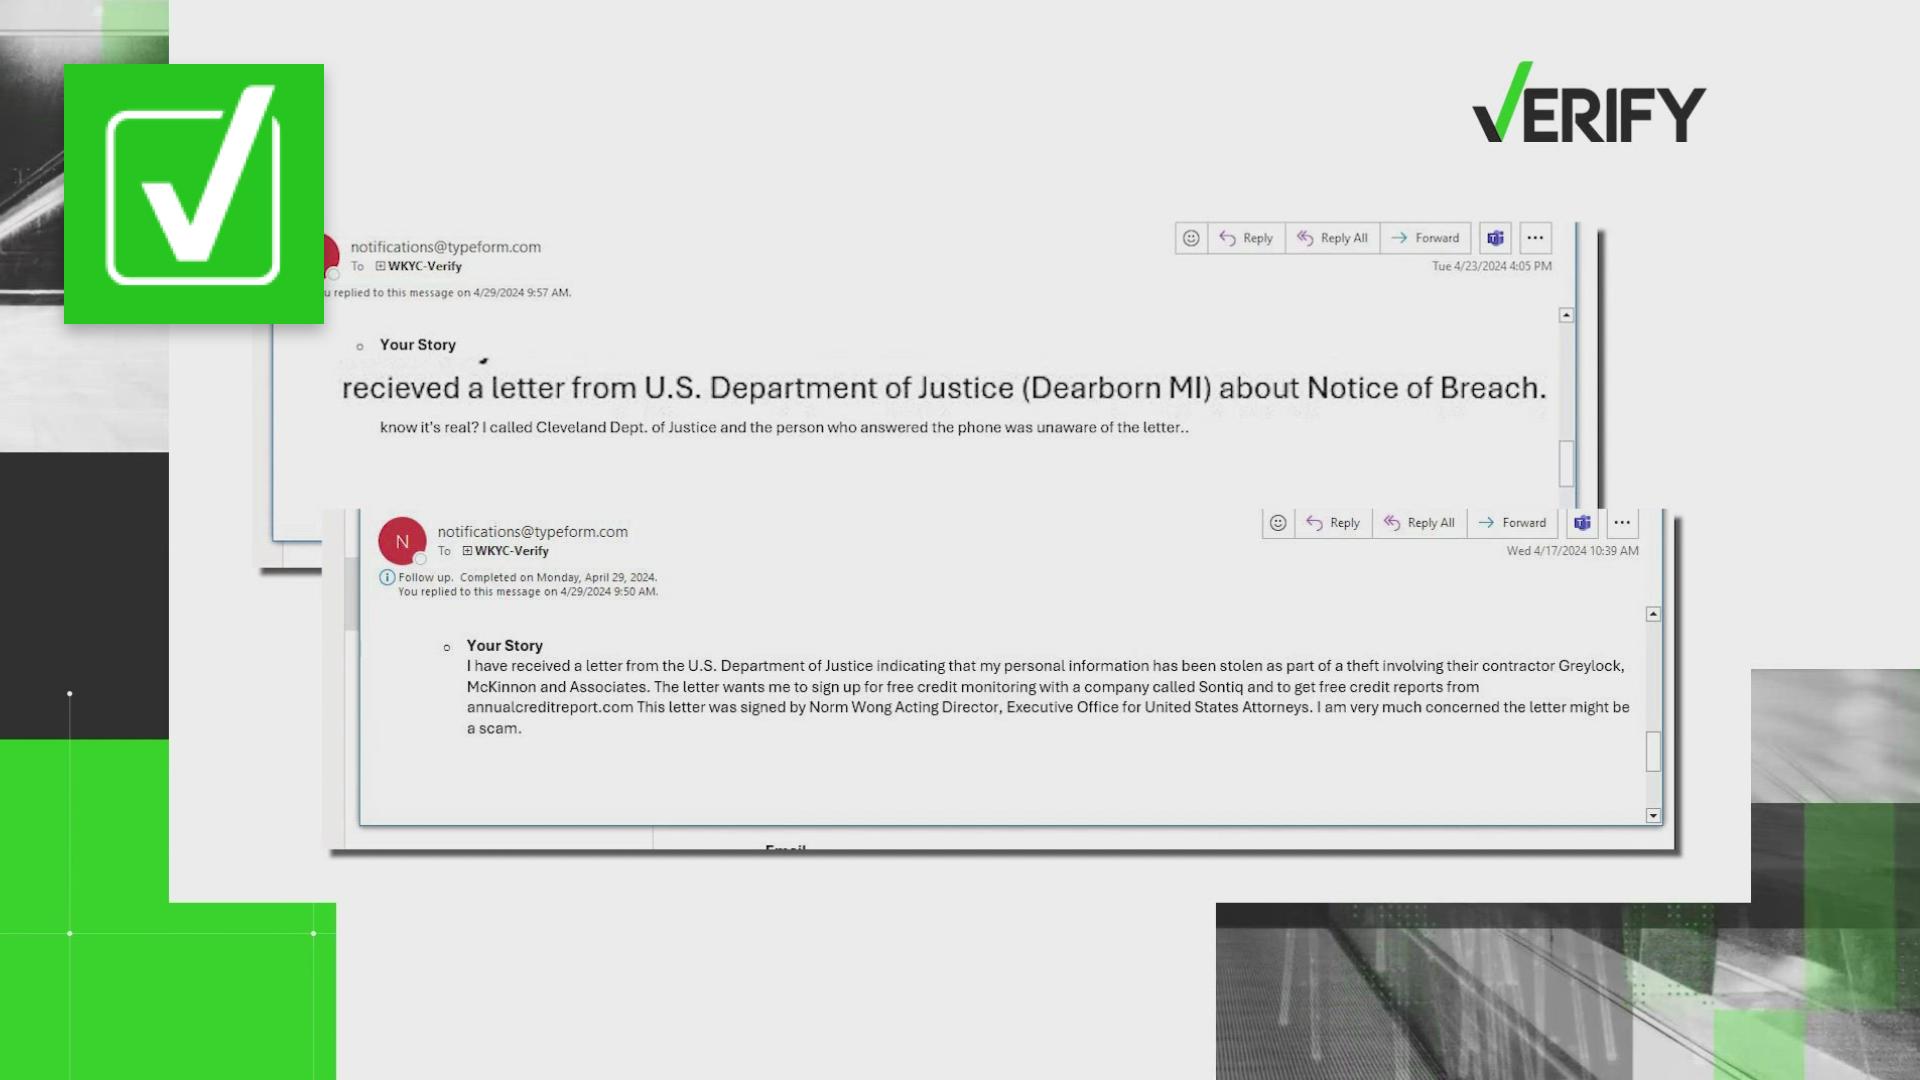 We VERIFY, Was there a data breach involving the US Department of Justice, and did the department send out letters to people who might be affected?